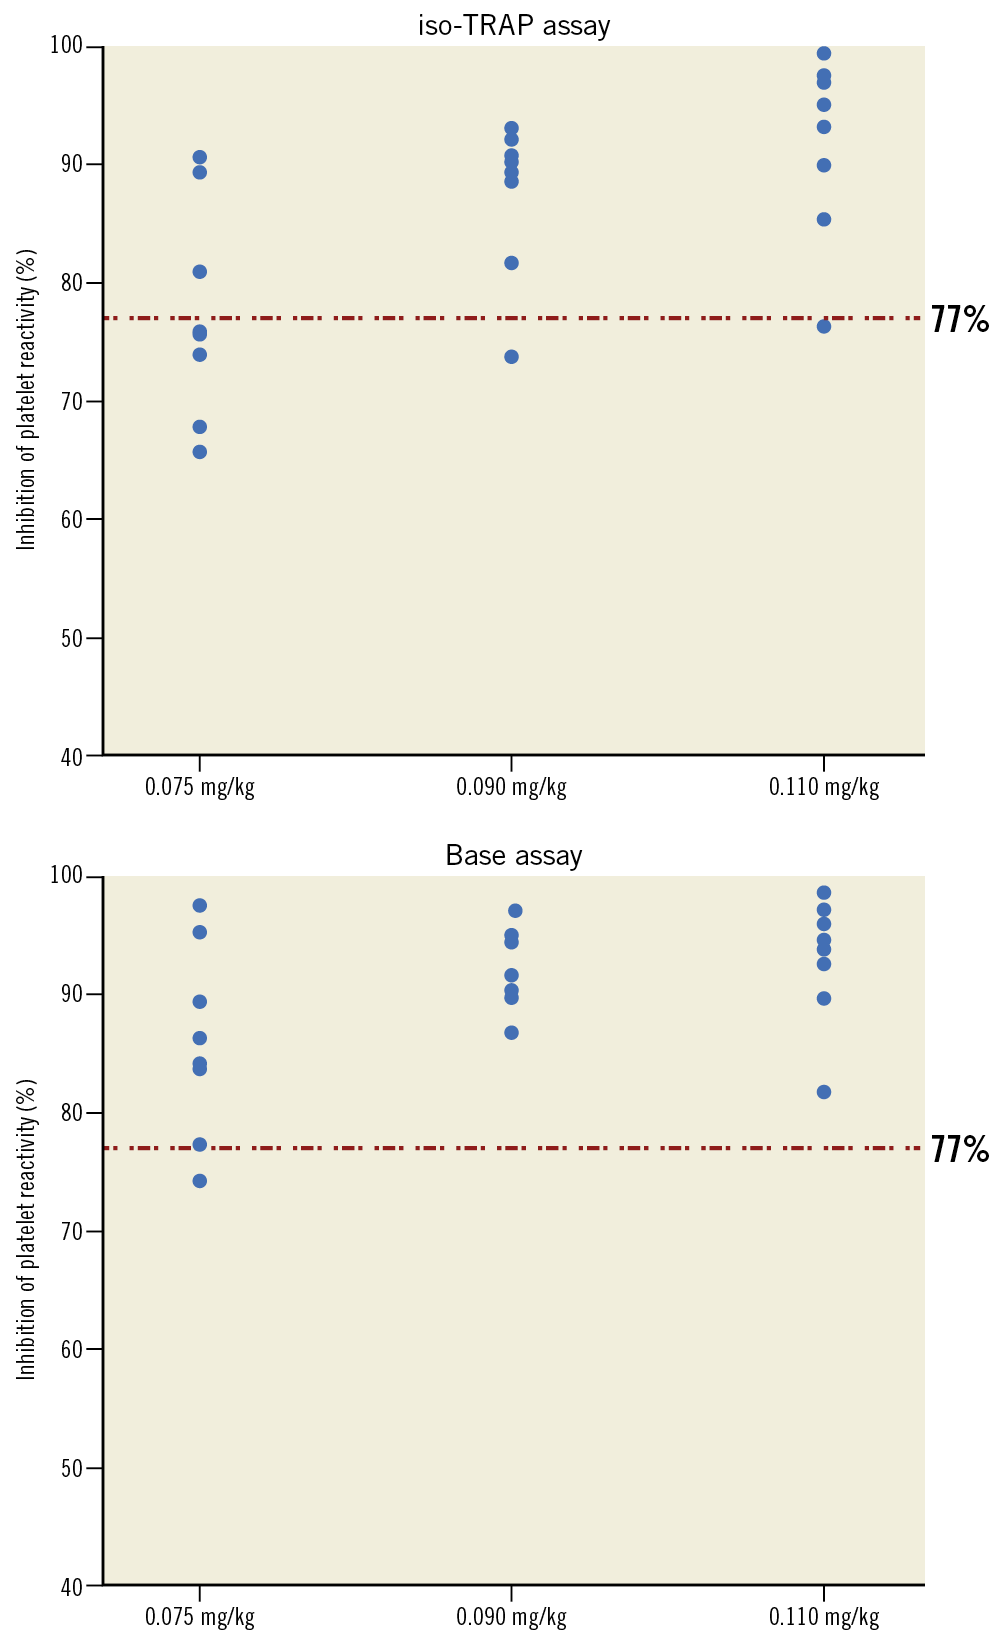 Figure 1. Pharmacodynamic response at 15 minutes post dose to different doses of RUC-4. Inhibition of platelet reactivity, assessed by VerifyNow iso-TRAP (A) and Base (B, iso-TRAP + PAR-4) assays 15 minutes following subcutaneous injection of RUC-4 at 0.075, 0.090, and 0.110 mg/kg. PAR-4: protease-activated receptor 4; TRAP: thrombin receptor activating peptide